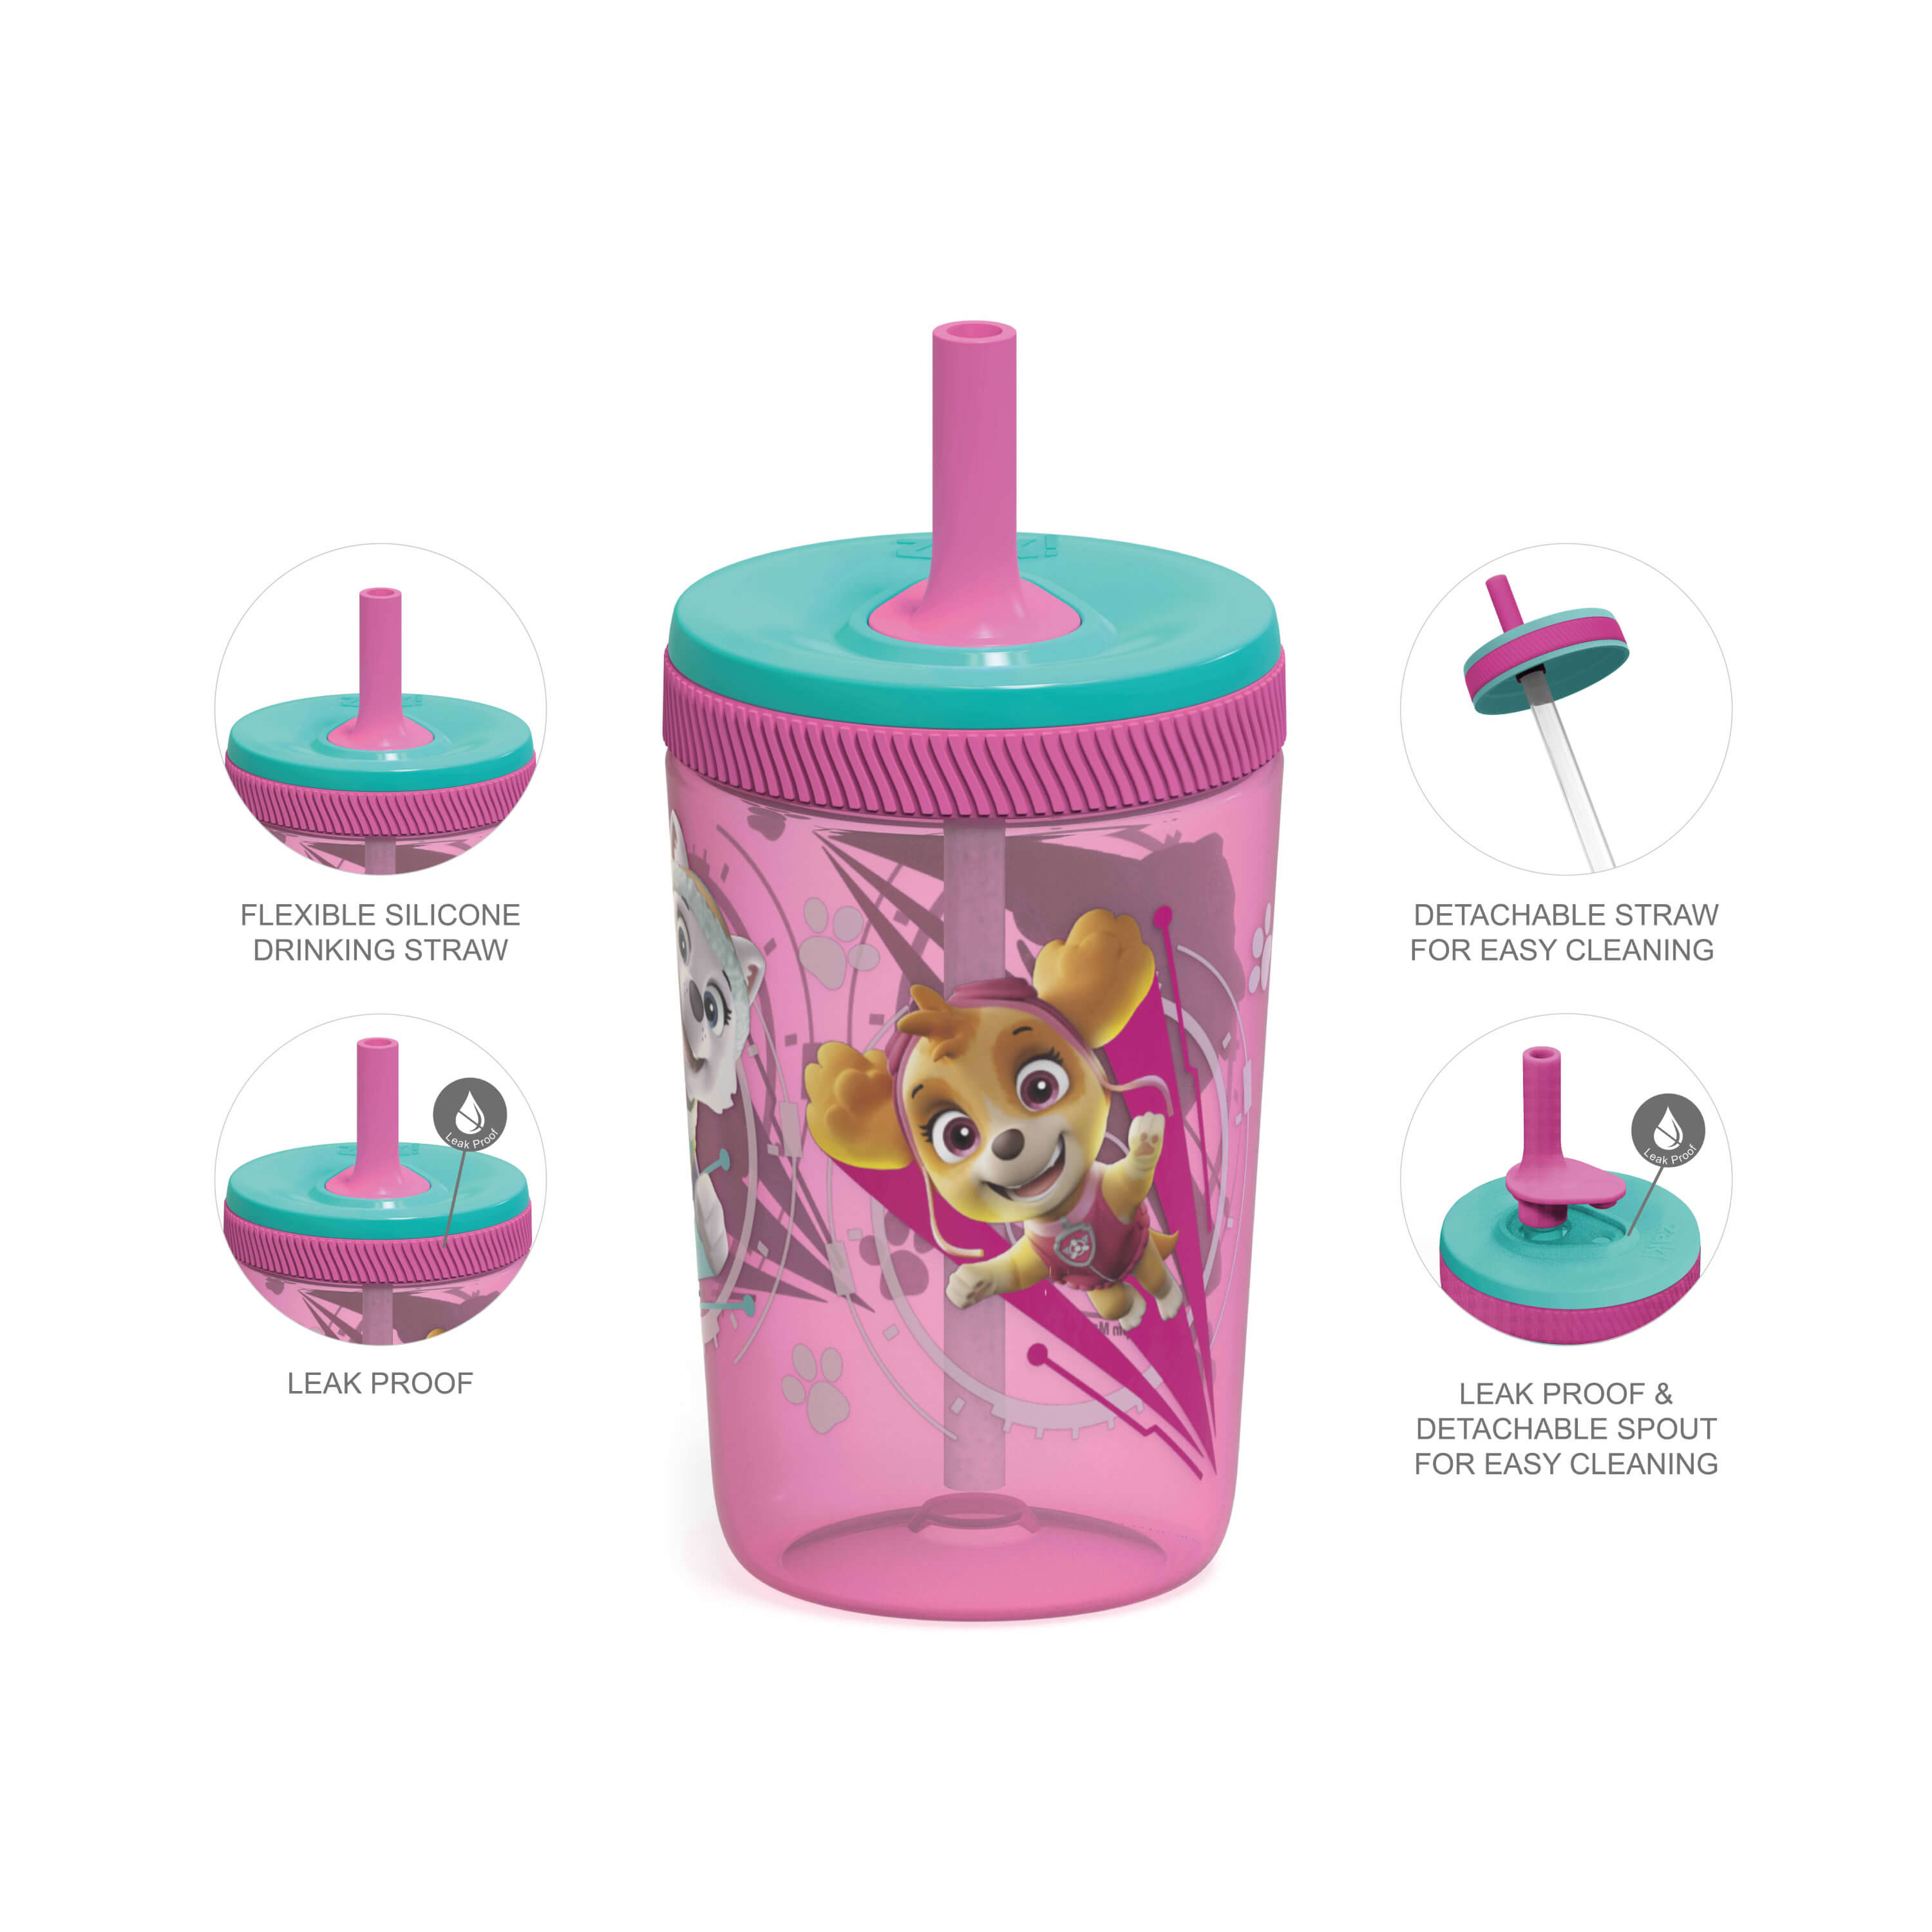 Paw Patrol With Tie Dye Sippy Cup – Gina's Crafty Girls